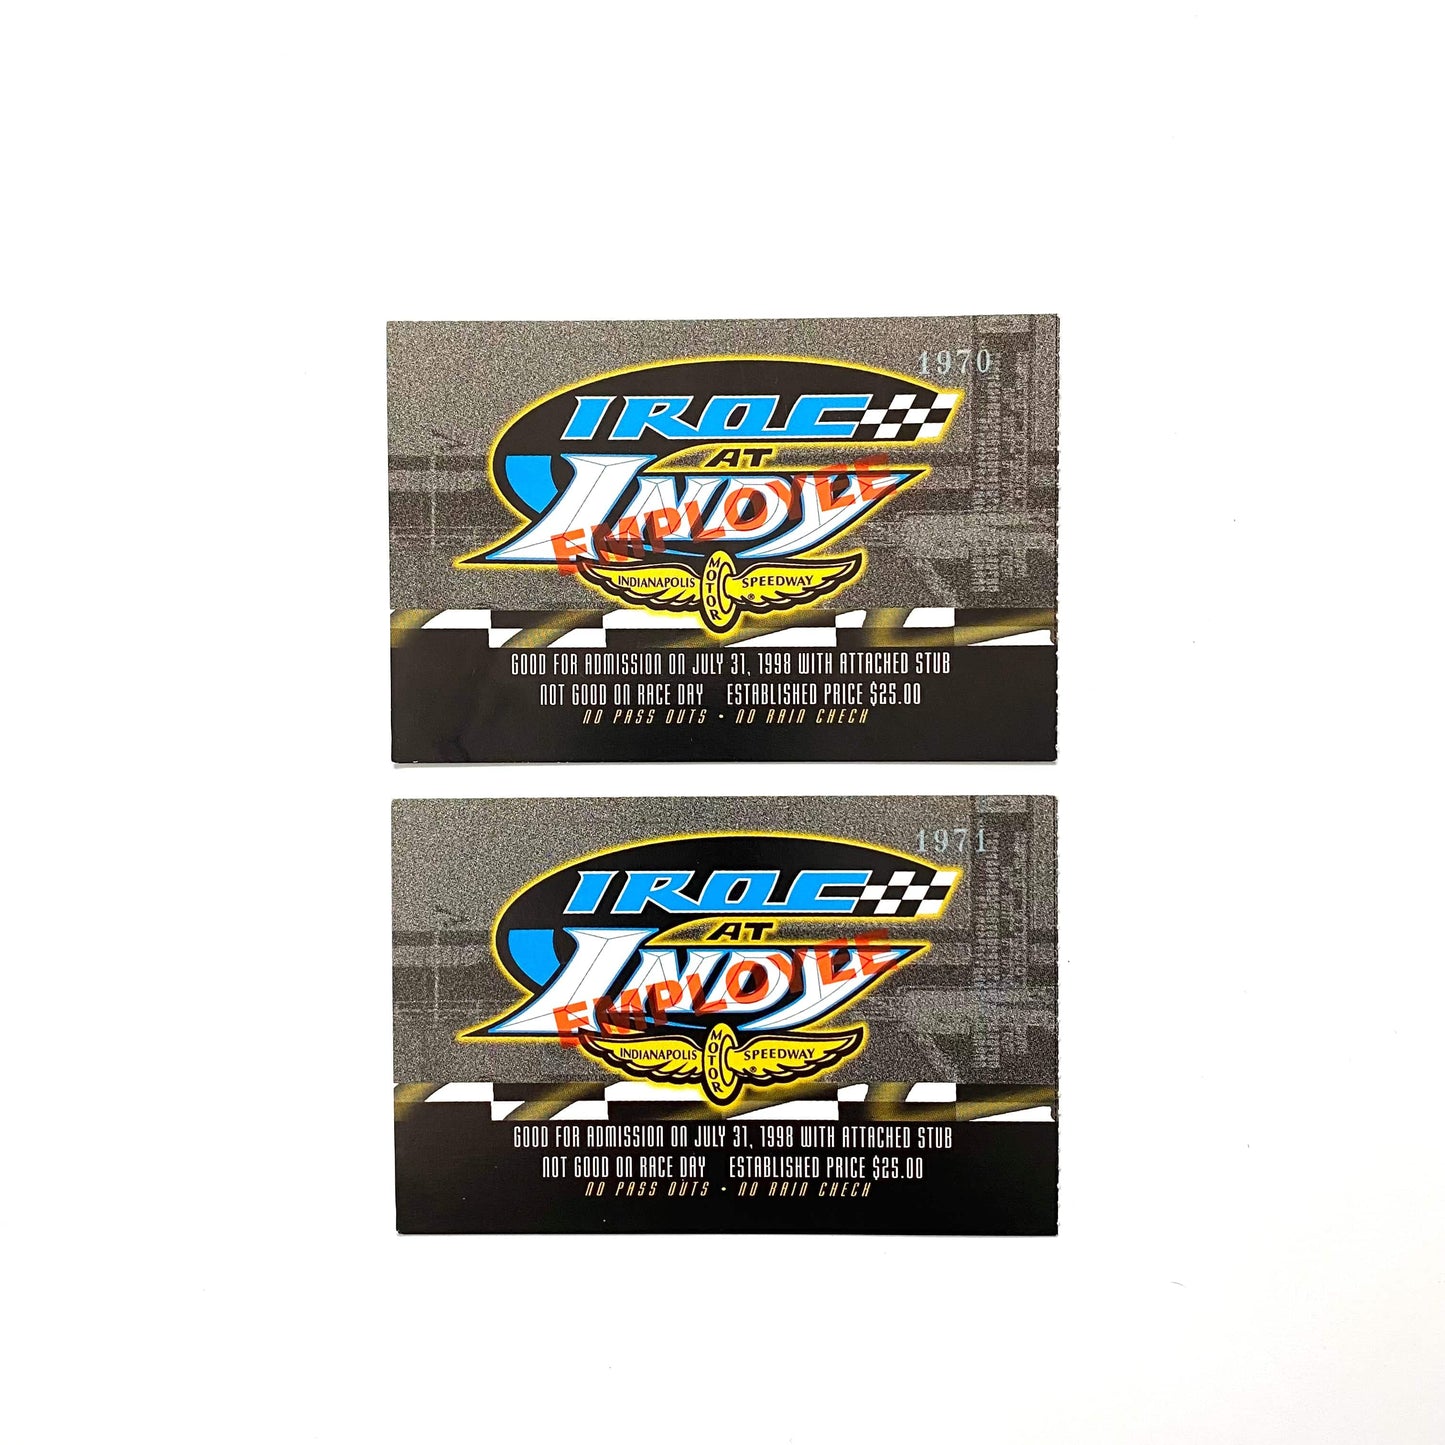 1998 IROC at INDY Indianapolis Motor Speedway EMPLOYEE Ticket Stubs, Set of